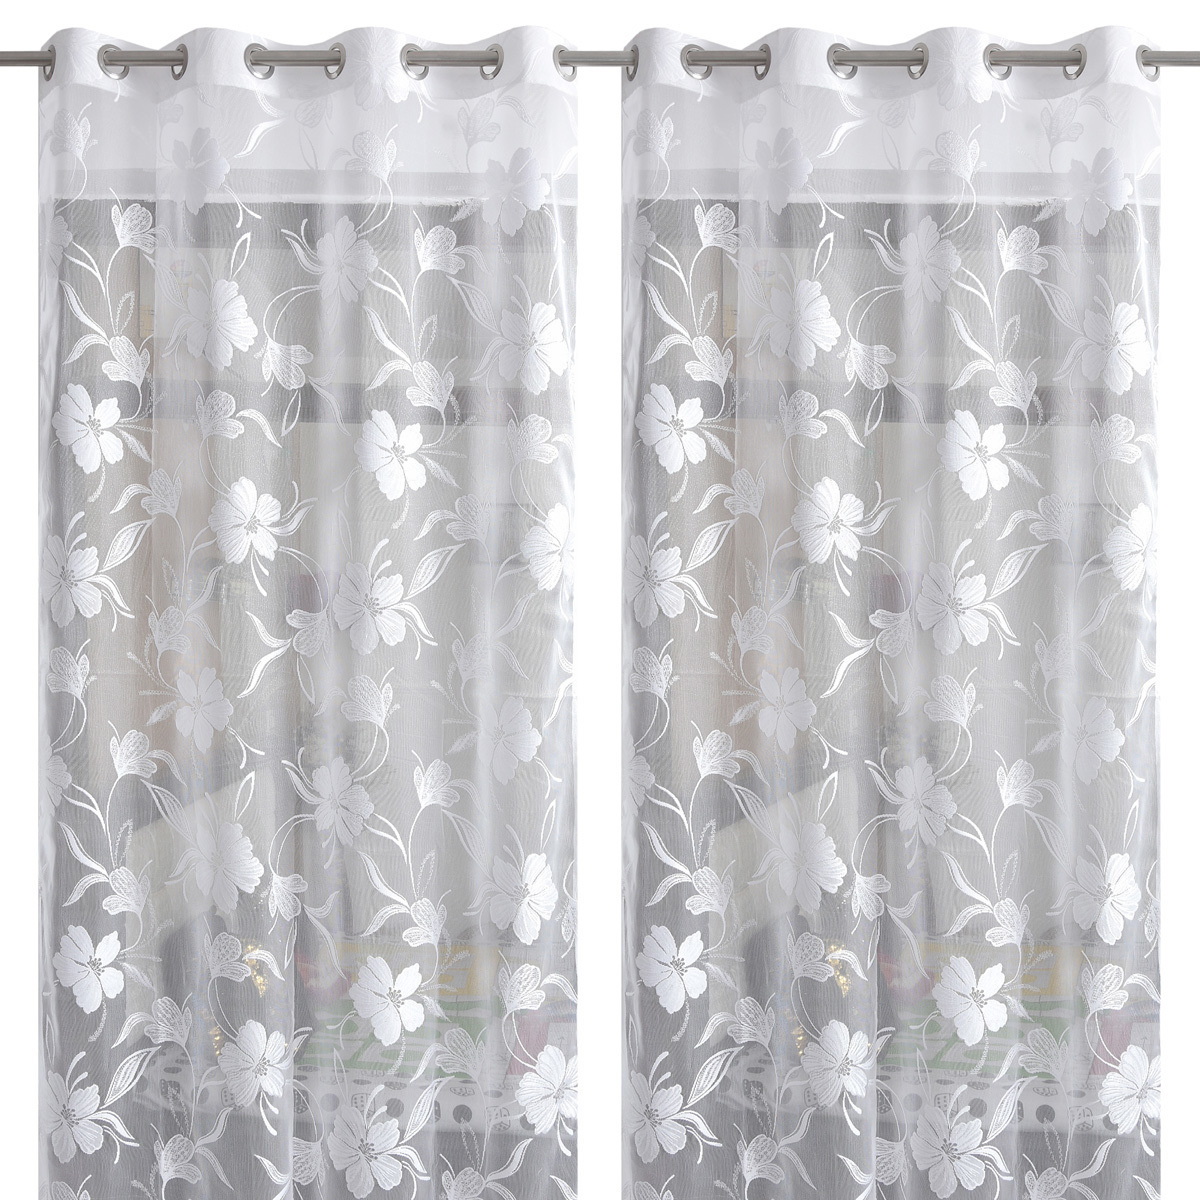 HANDTEX HOME Sheer White Net Curtains With Beautiful Embroidered Floral Designs for Door 4ft x 9ft Set of 2 SP06